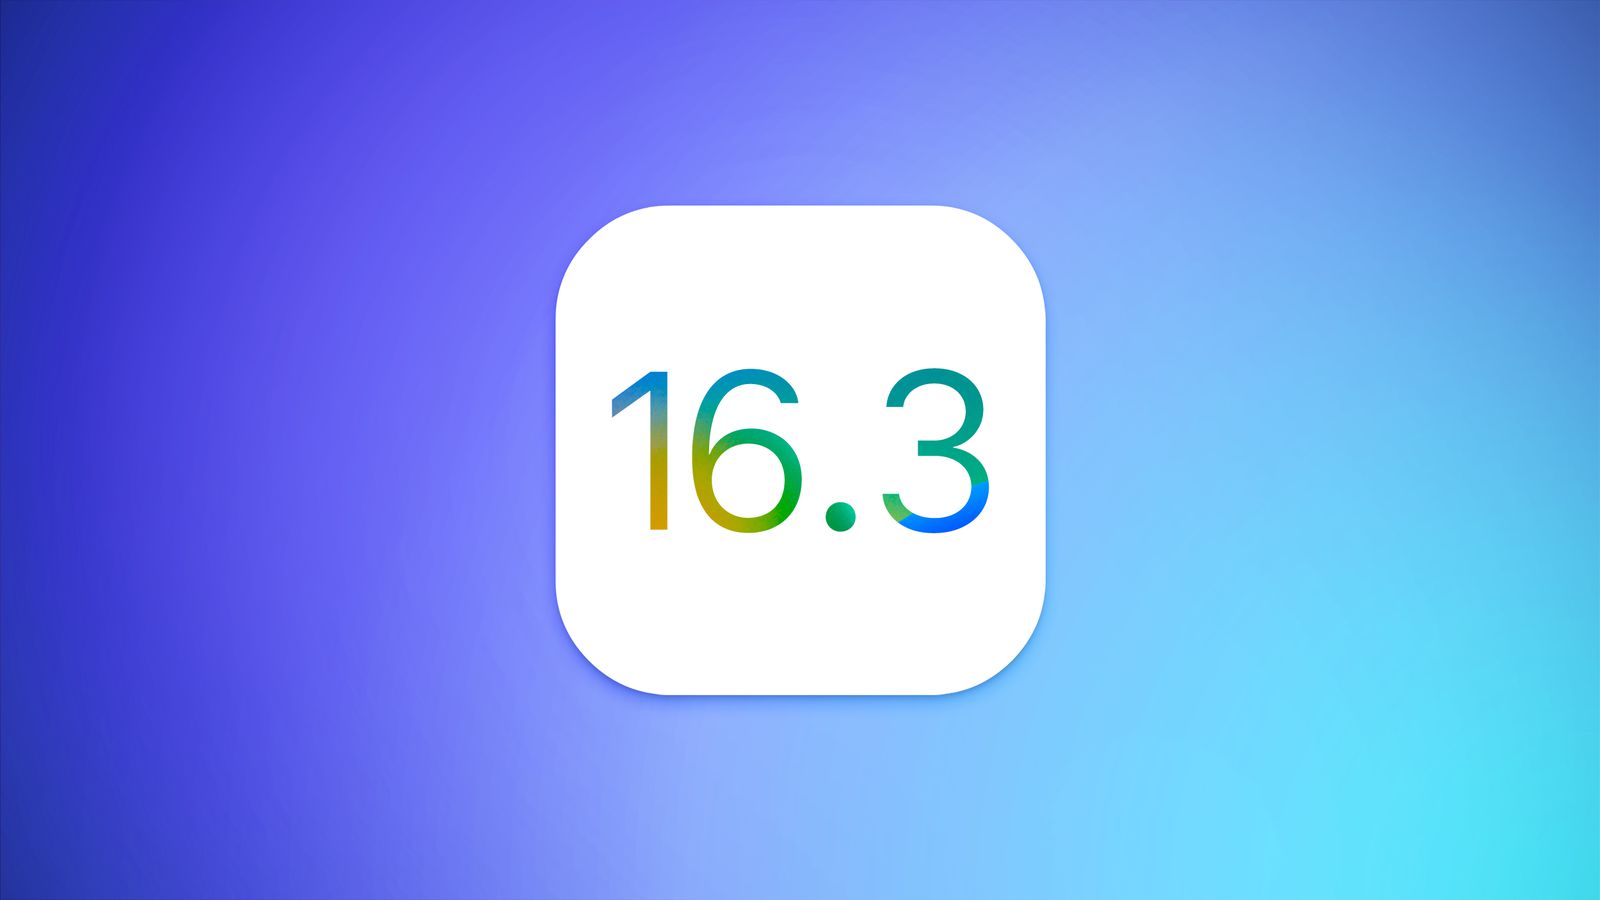 Apple released iOS 16.3 Beta 1 for developers